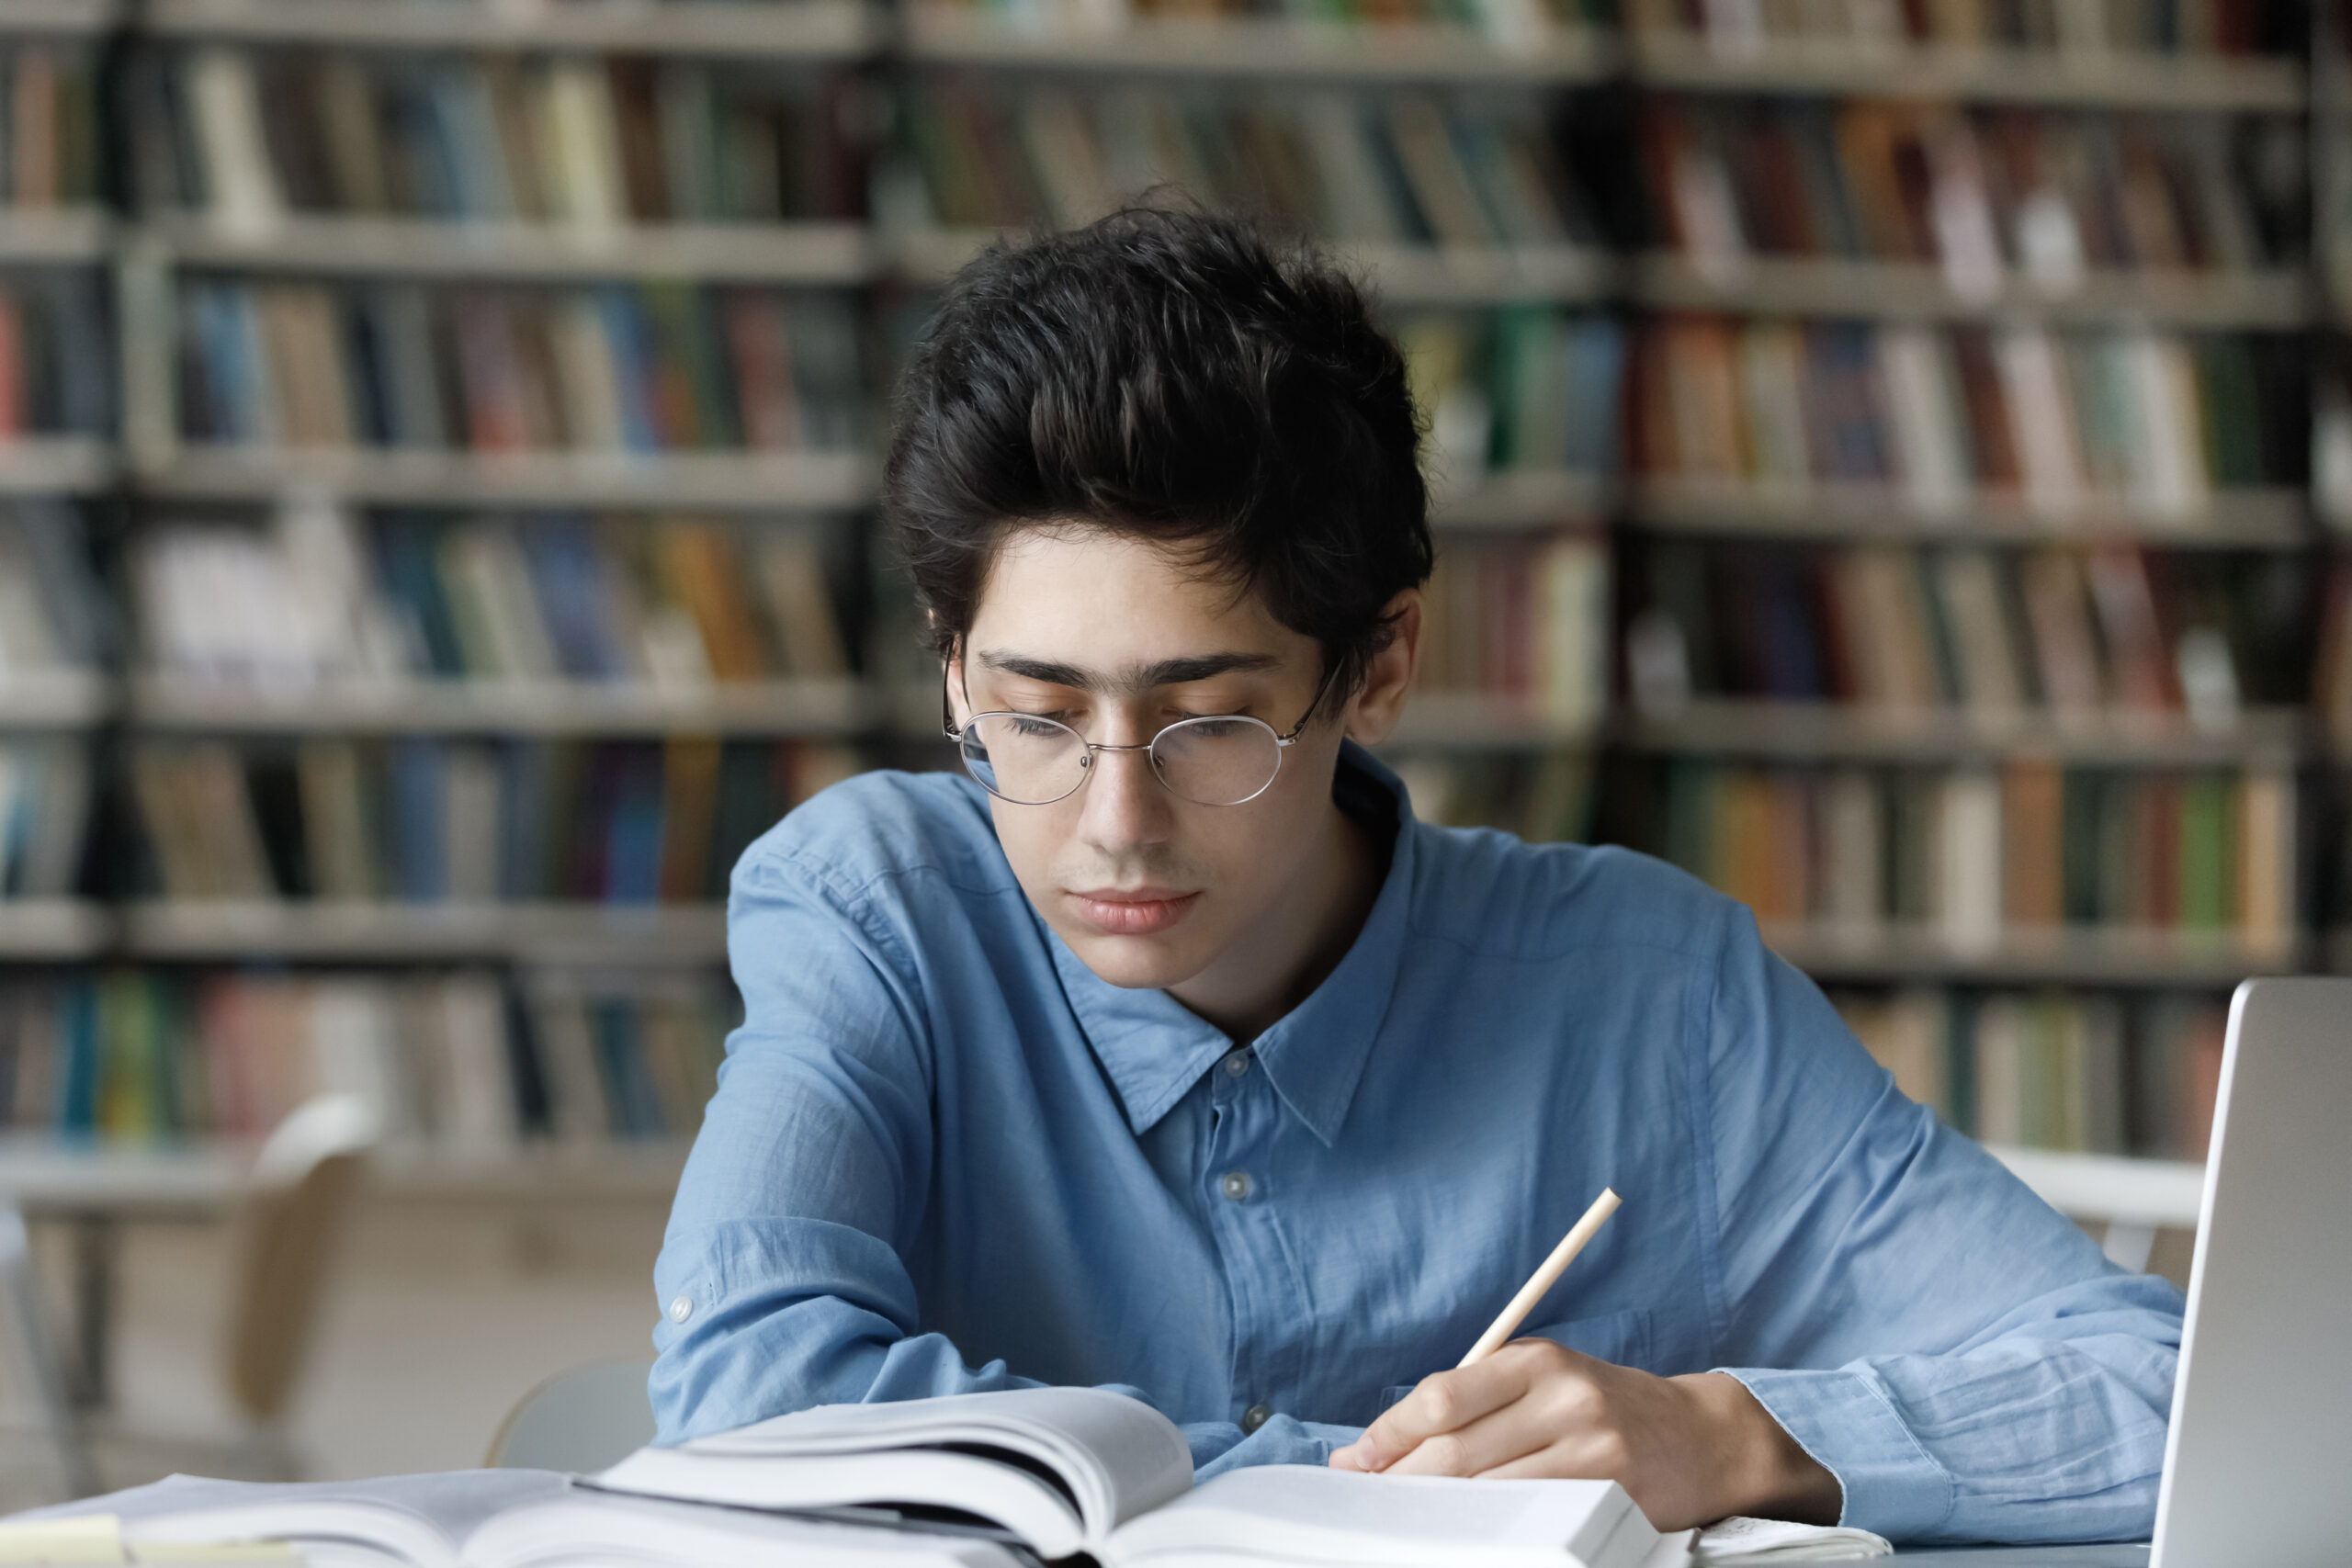 Focused busy young male Jewish student studying in library.